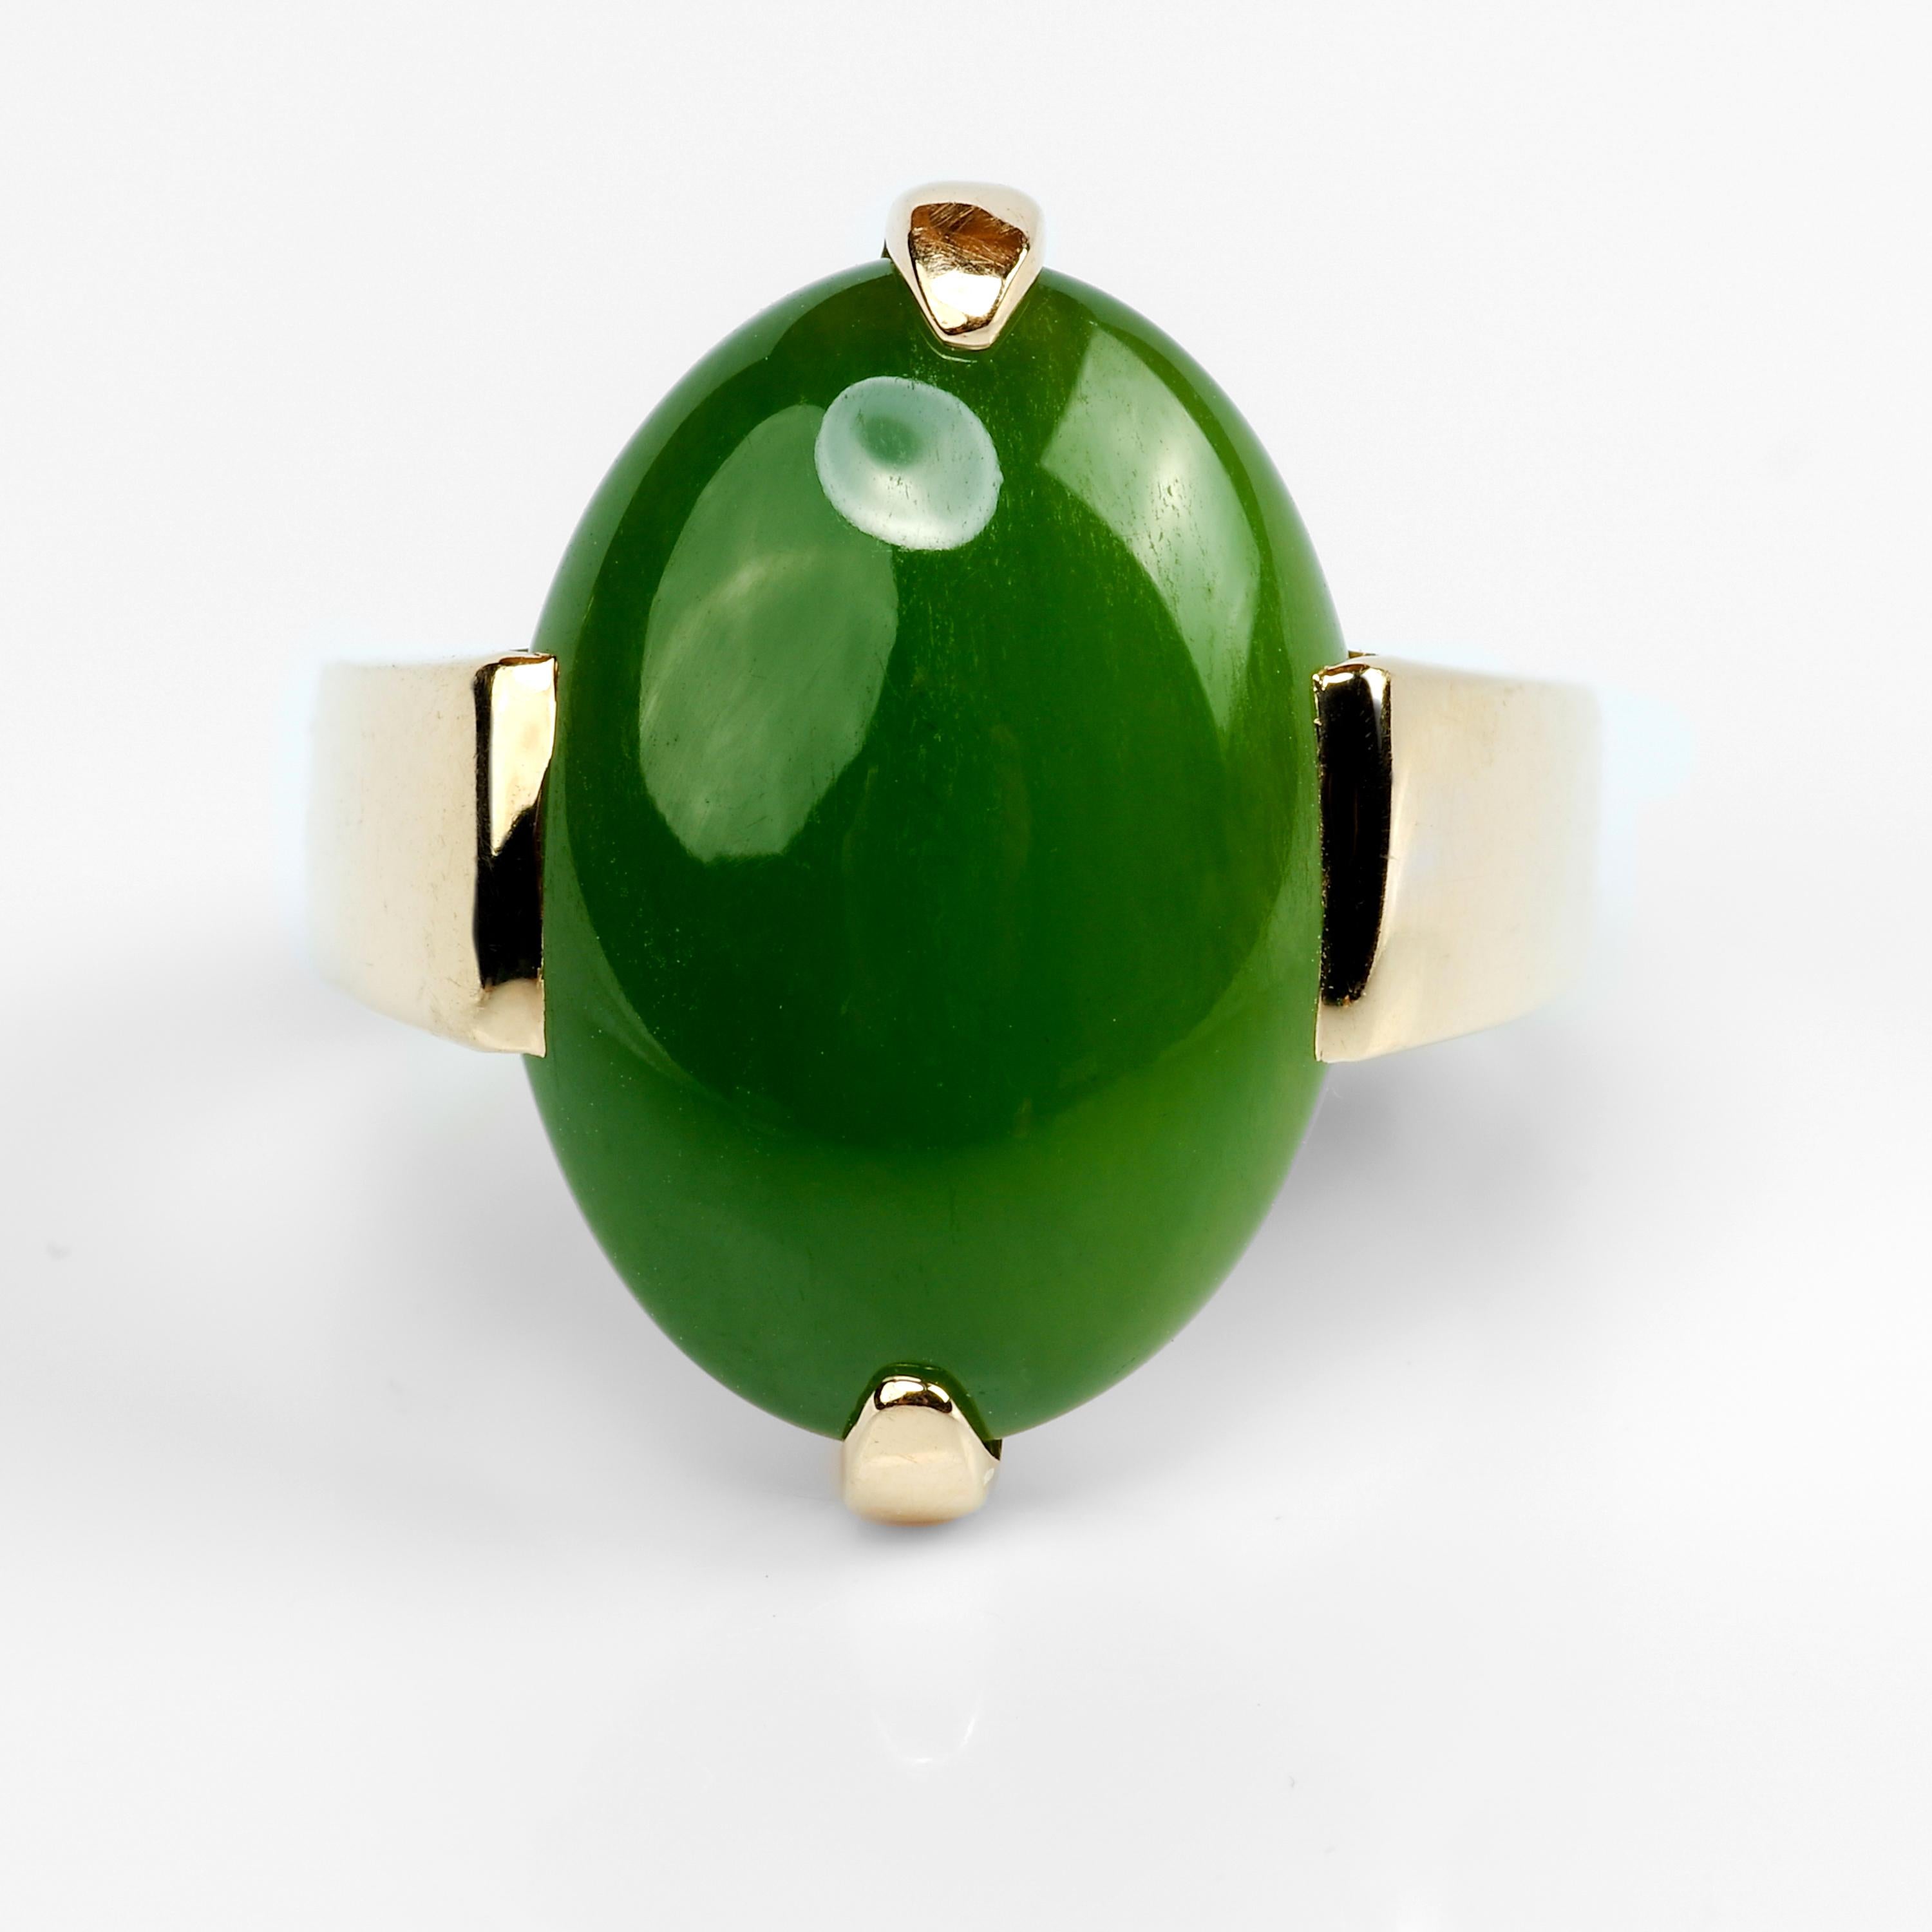 This is the classic, iconic and nearly-impossible-to-find Gump's jade ring and it features a luminous forest-green cabochon of natural nephrite jade. Crafted in 14k yellow gold and fully hallmarked, this is exactly the ring I picture when I think of